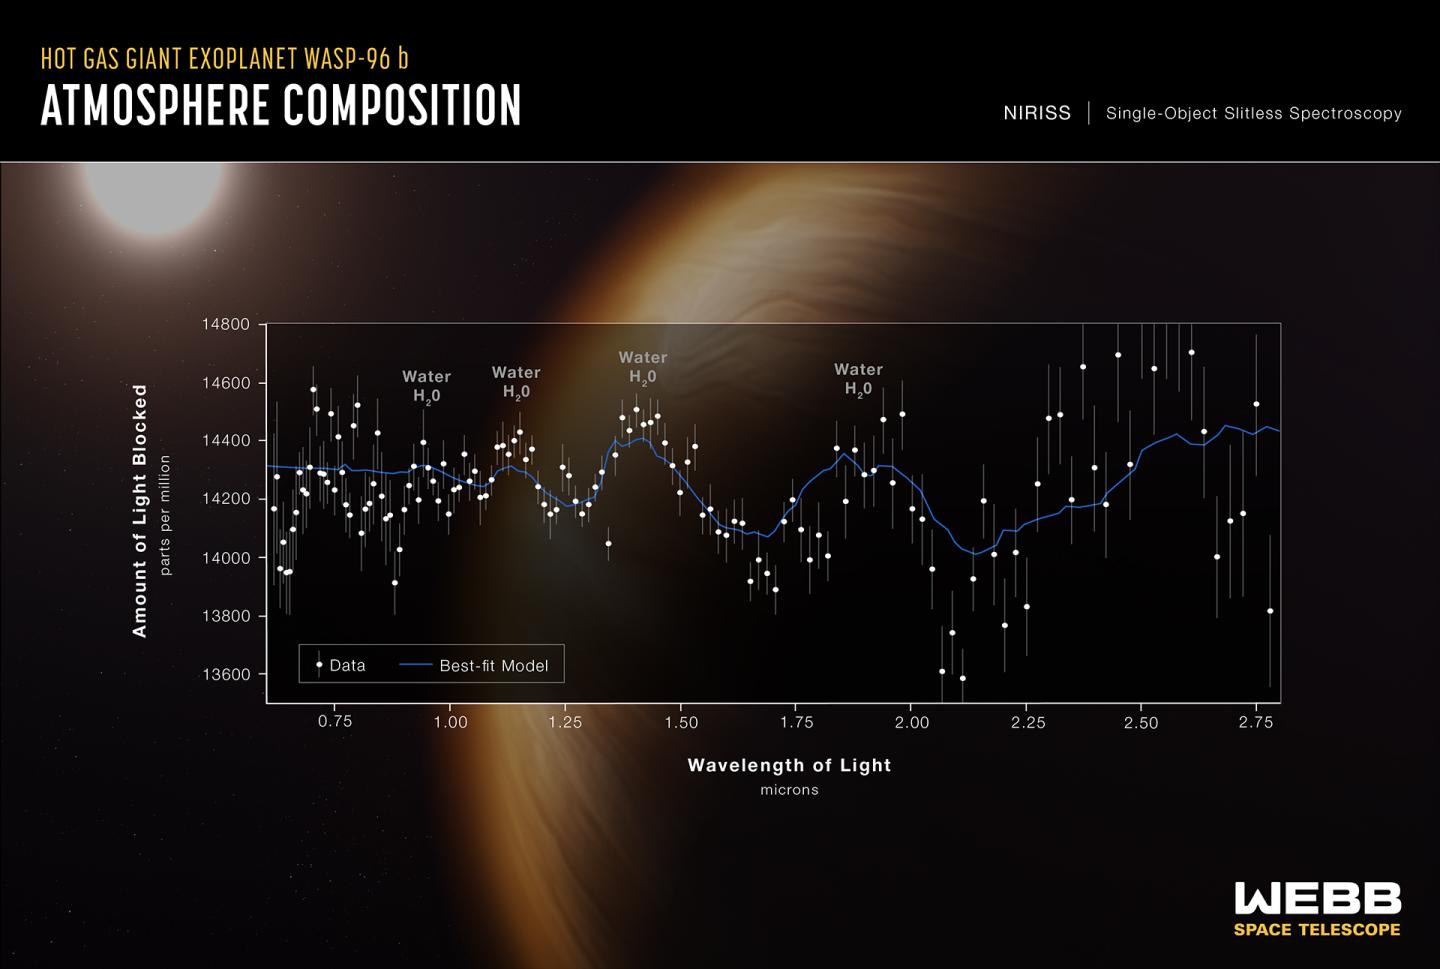 Graphic titled “Hot Gas Giant Exoplanet WASP-96 b Atmosphere Composition, NIRISS Single-Object Slitless Spectroscopy.” The graphic shows the transmission spectrum of the hot gas giant exoplanet WASP-96 b captured using Webb's NIRISS Single-Object Slitless Spectroscopy with an illustration of the planet and its star in the background.